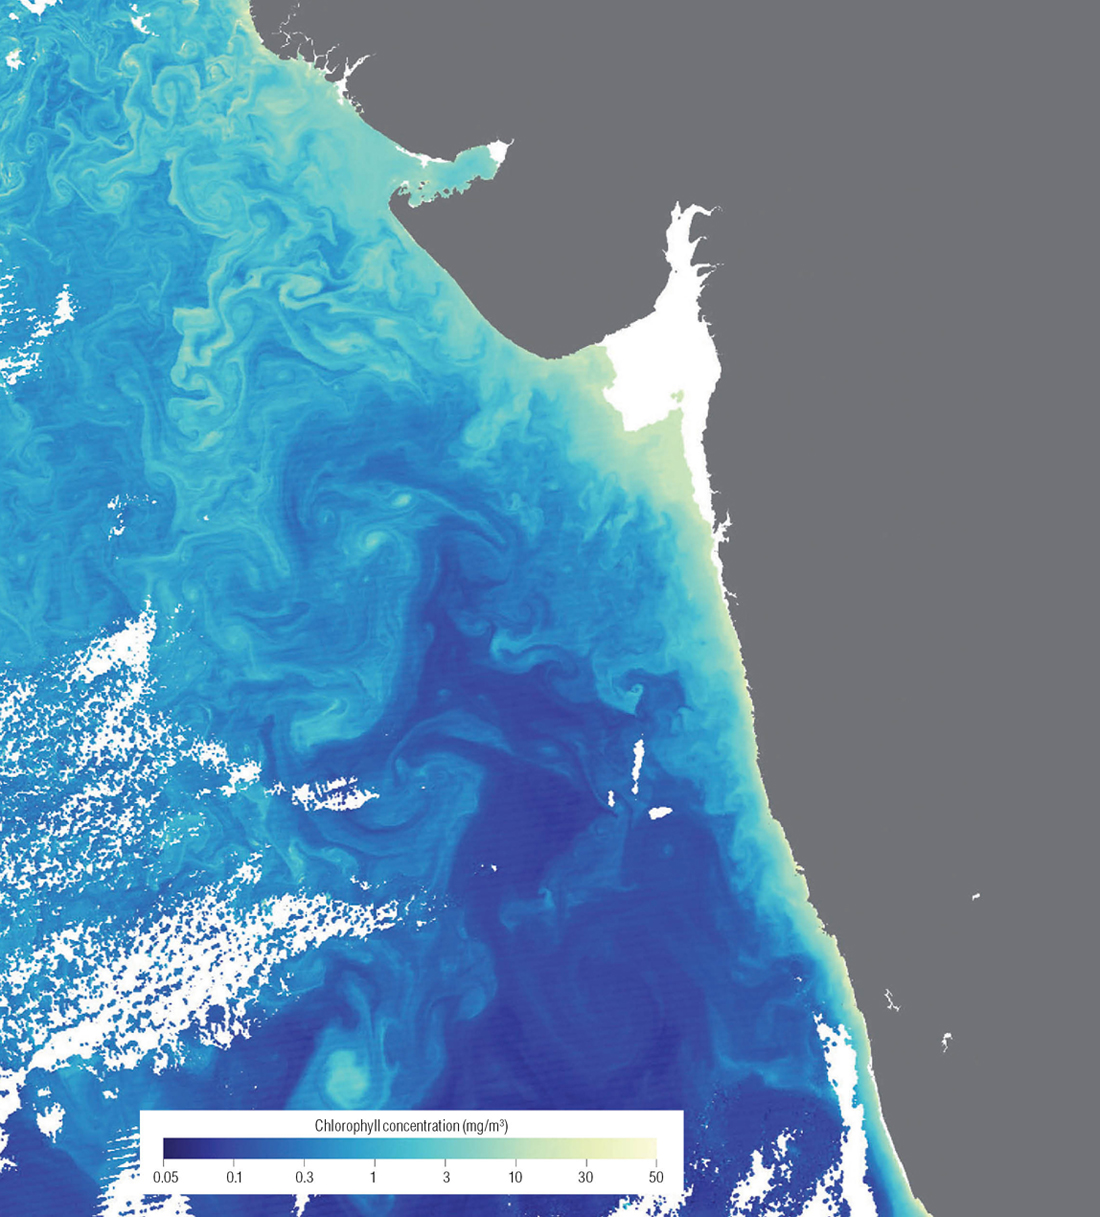 Monitoring of Algal Blooms in the Indian Seas